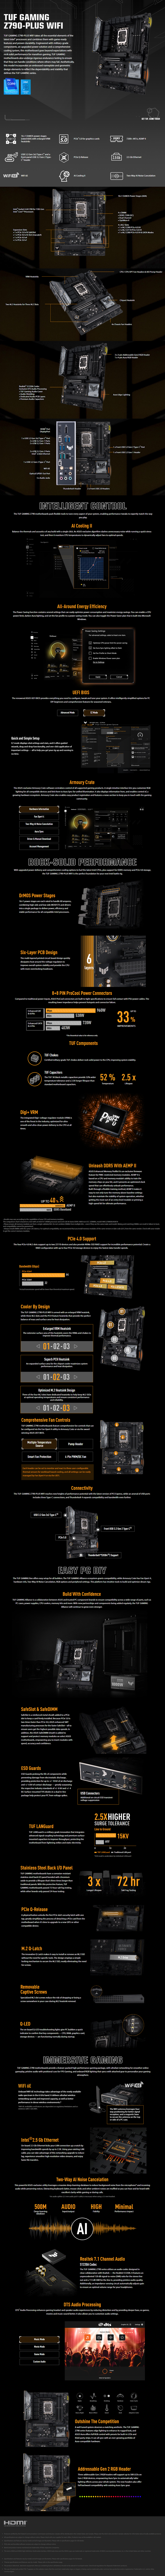 A large marketing image providing additional information about the product ASUS TUF Gaming Z790-Plus WiFi LGA1700 ATX Desktop Motherboard - Additional alt info not provided